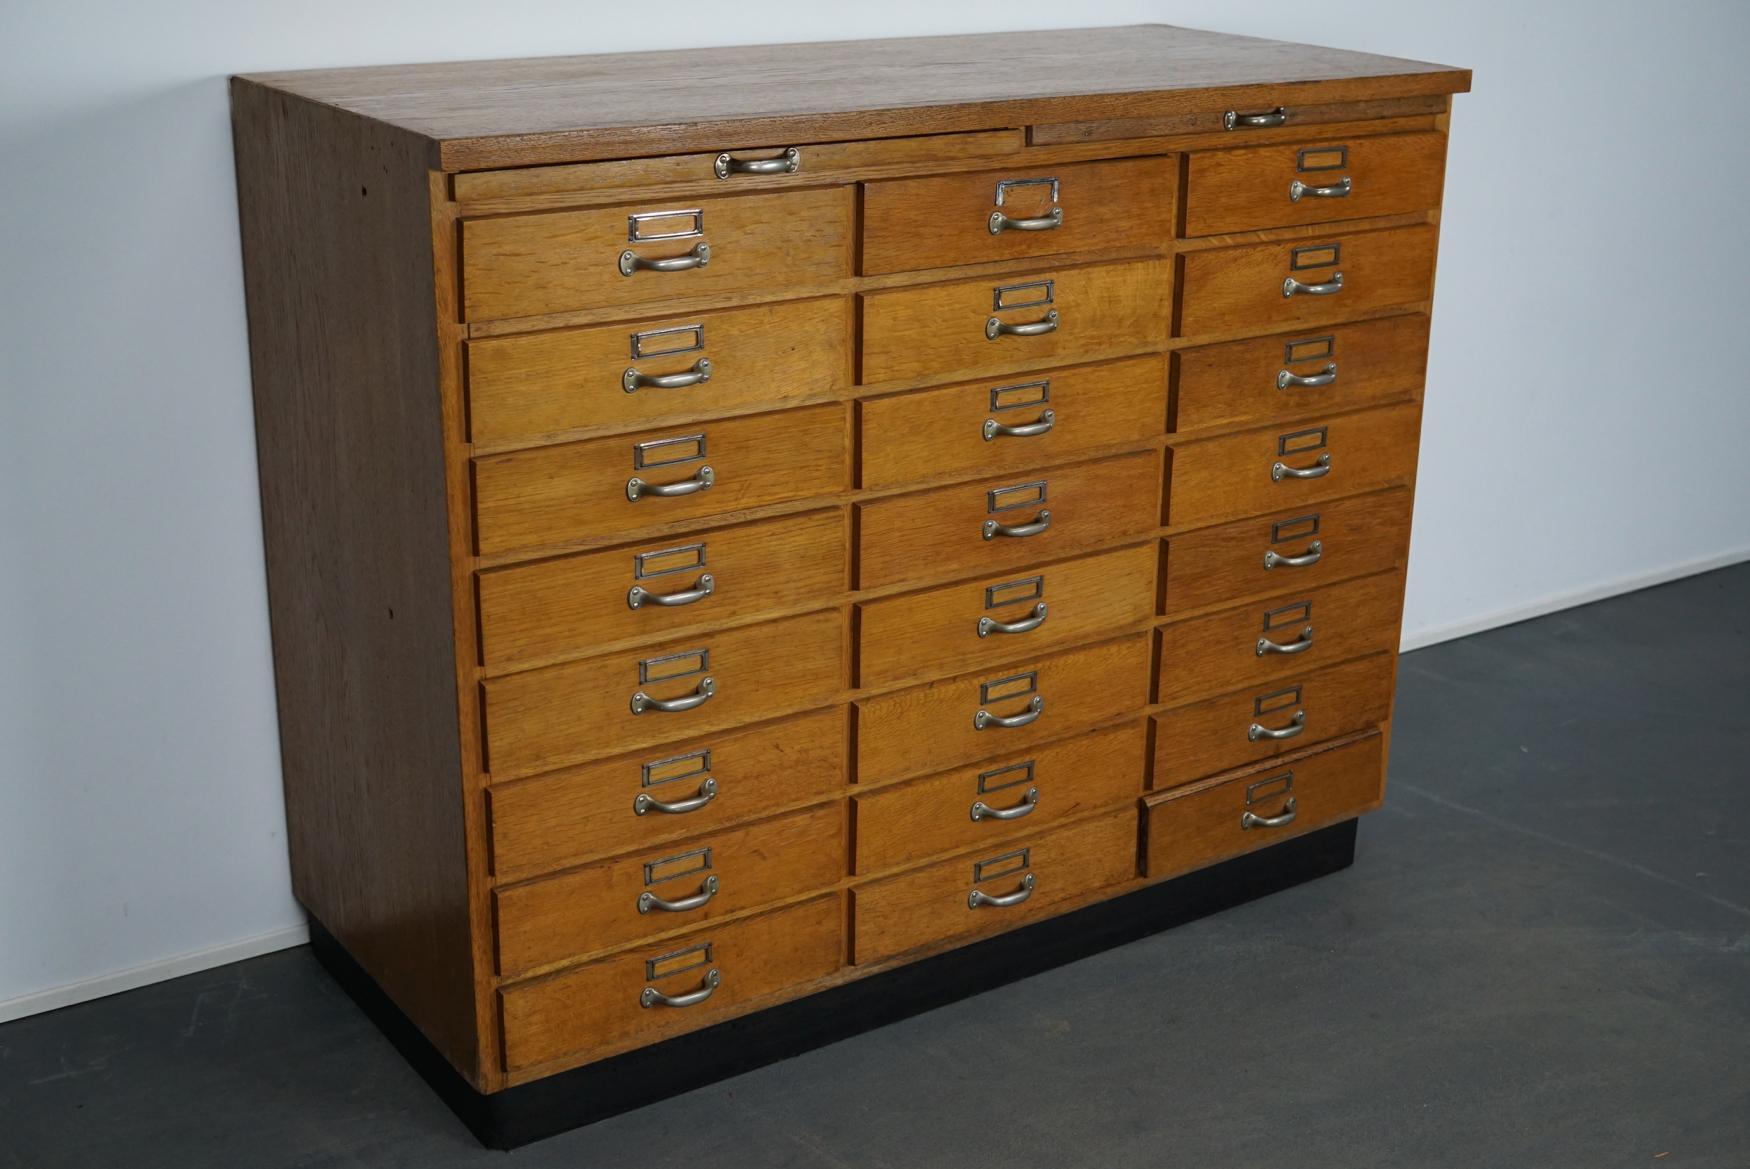 This apothecary cabinet was produced during the 1950s in Germany. This piece features 24 drawers with nice metal handles and card holders. The interior dimensions of the drawers are: D x W x H 45.5 x 33.5 x 7.5 cm.
   